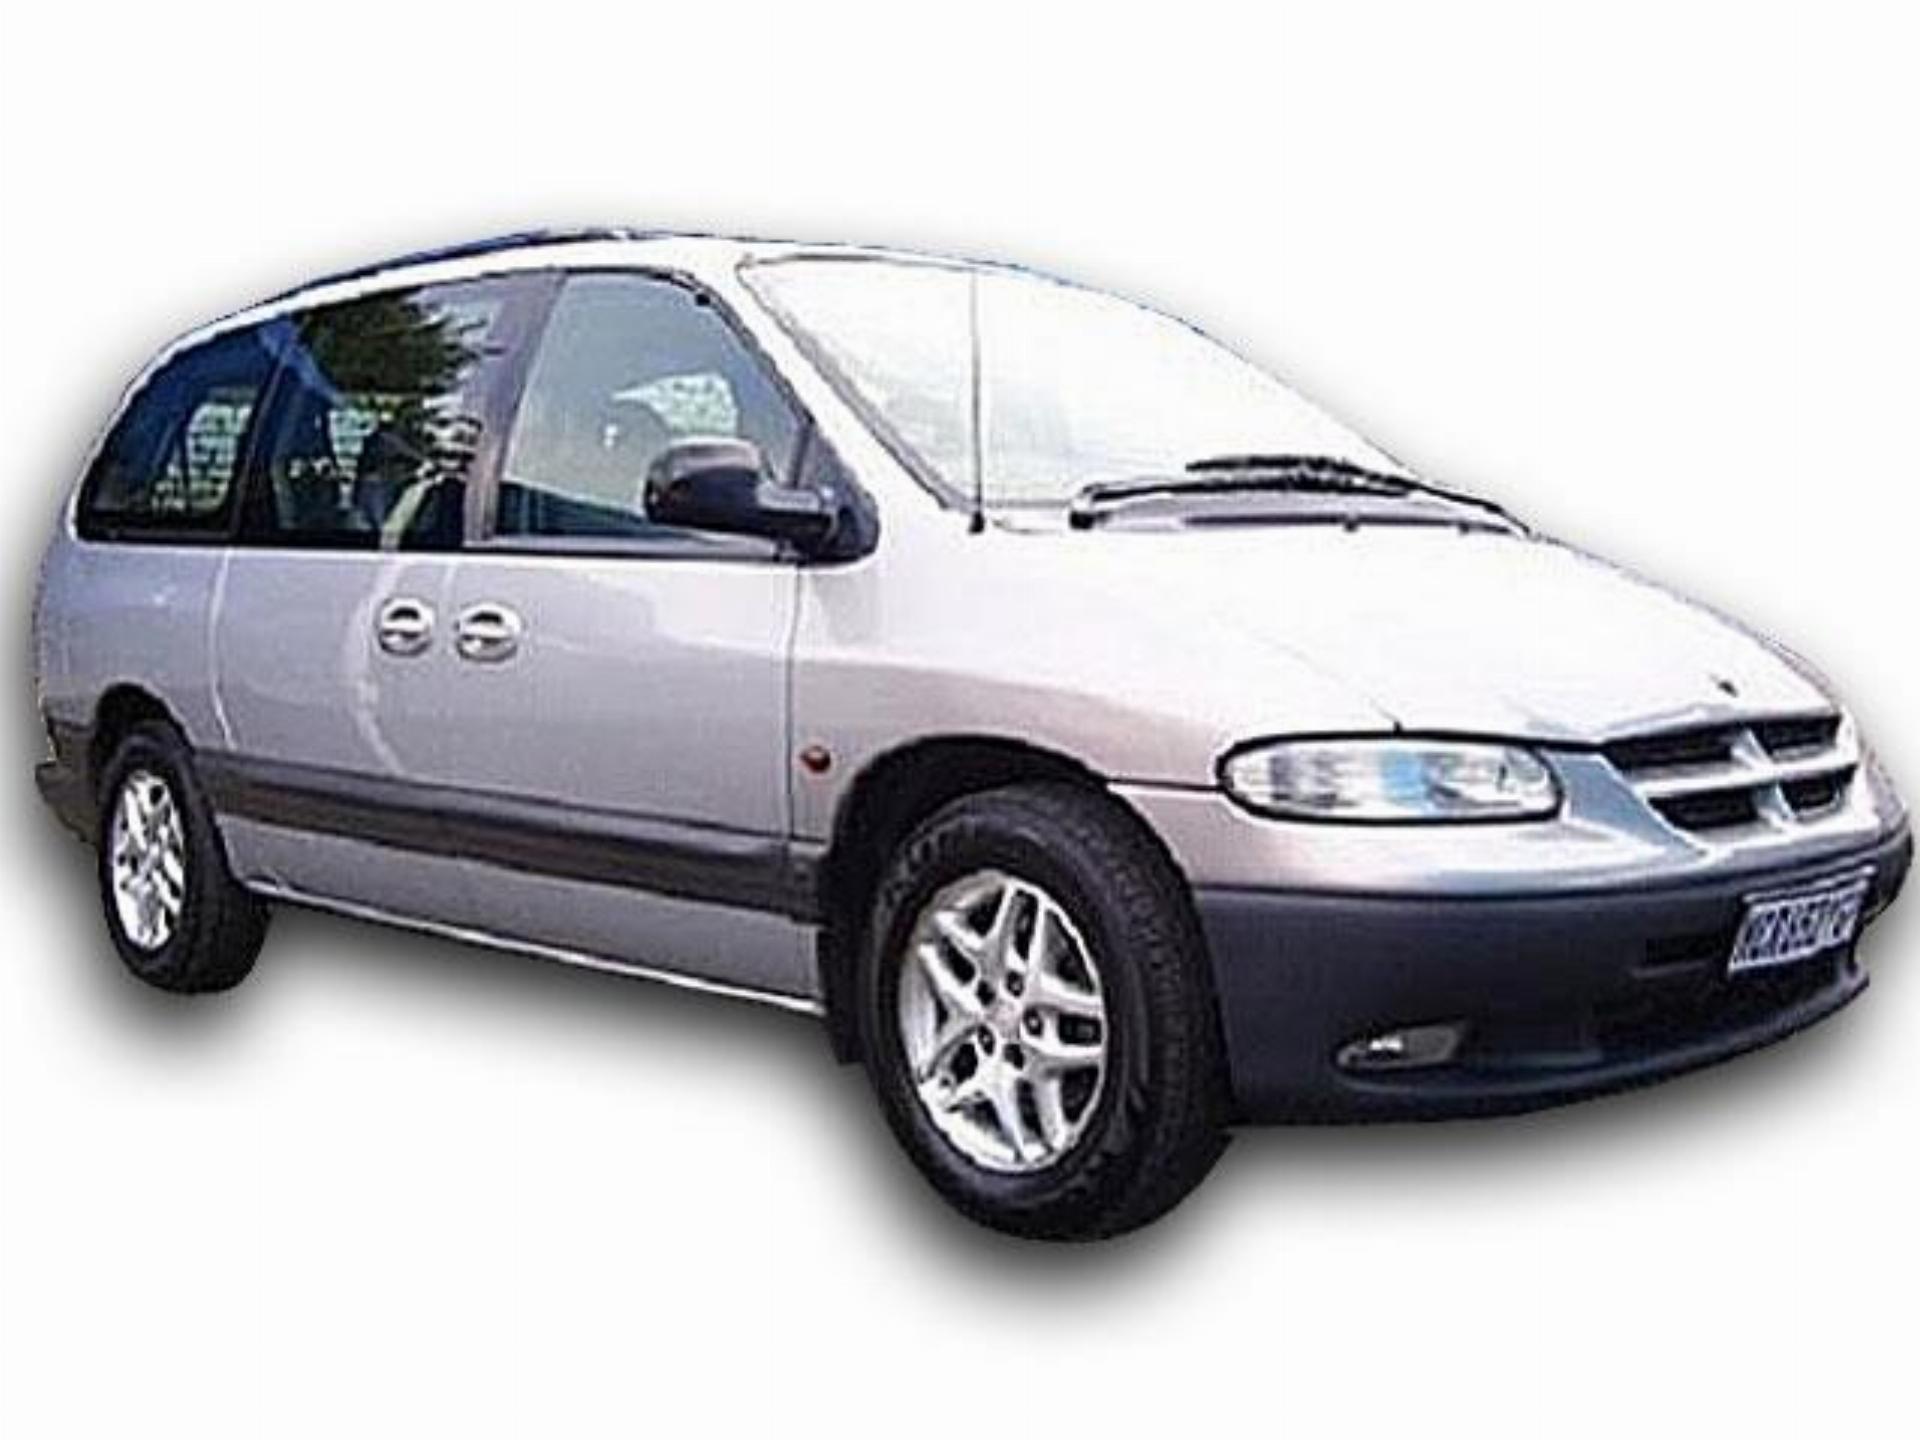 Used Chrysler Grand Voyager 3.3 LE 2000 on auction PV1003452